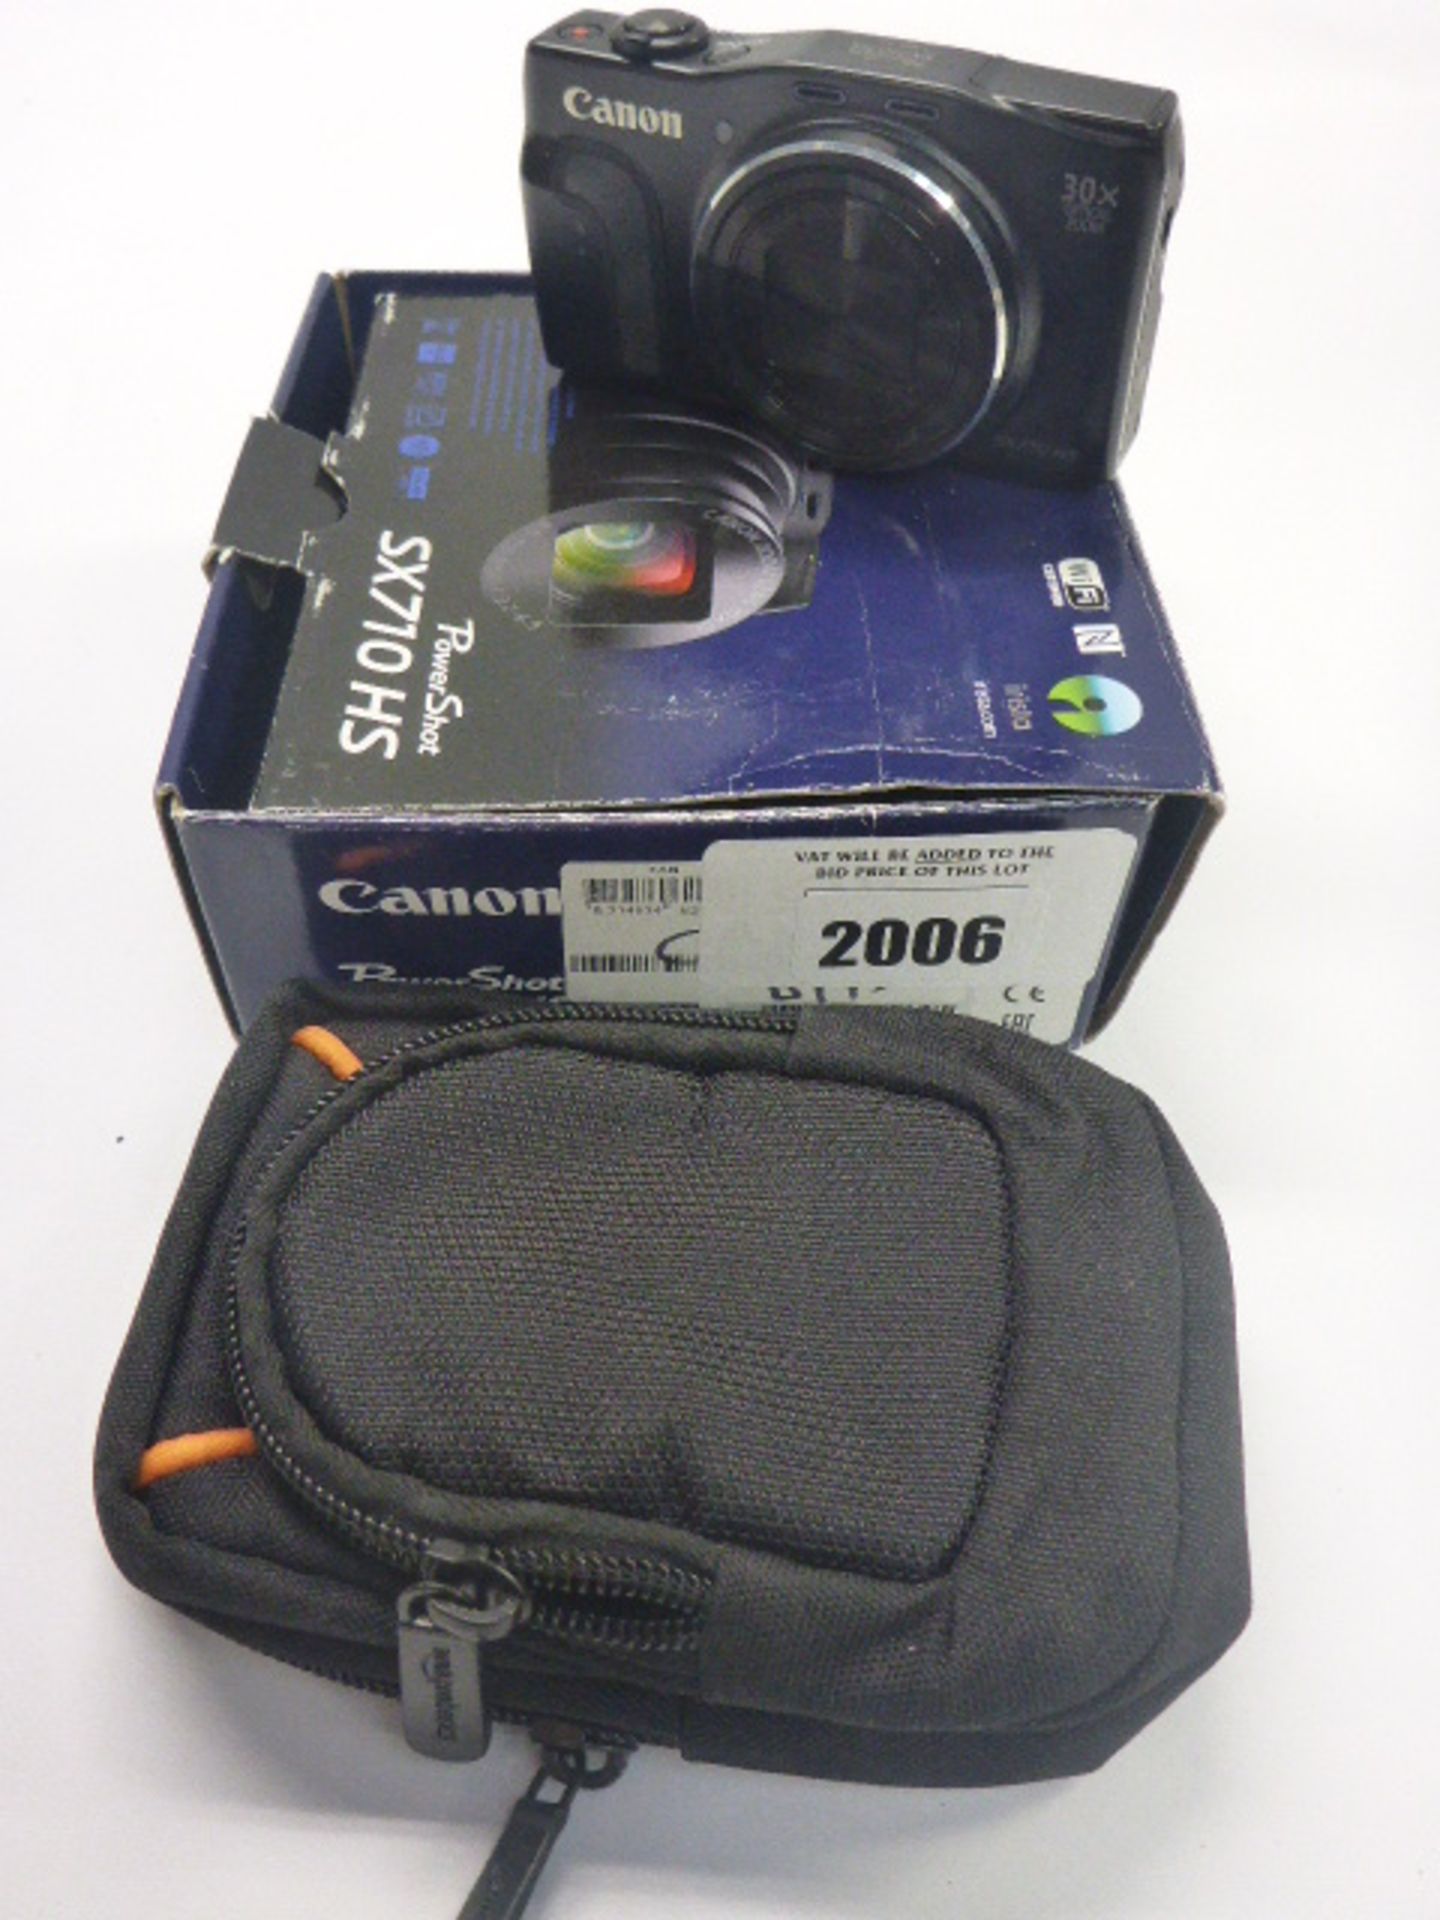 Canon Powershot SX710HS Includes 2 batteries ,charger, and box.